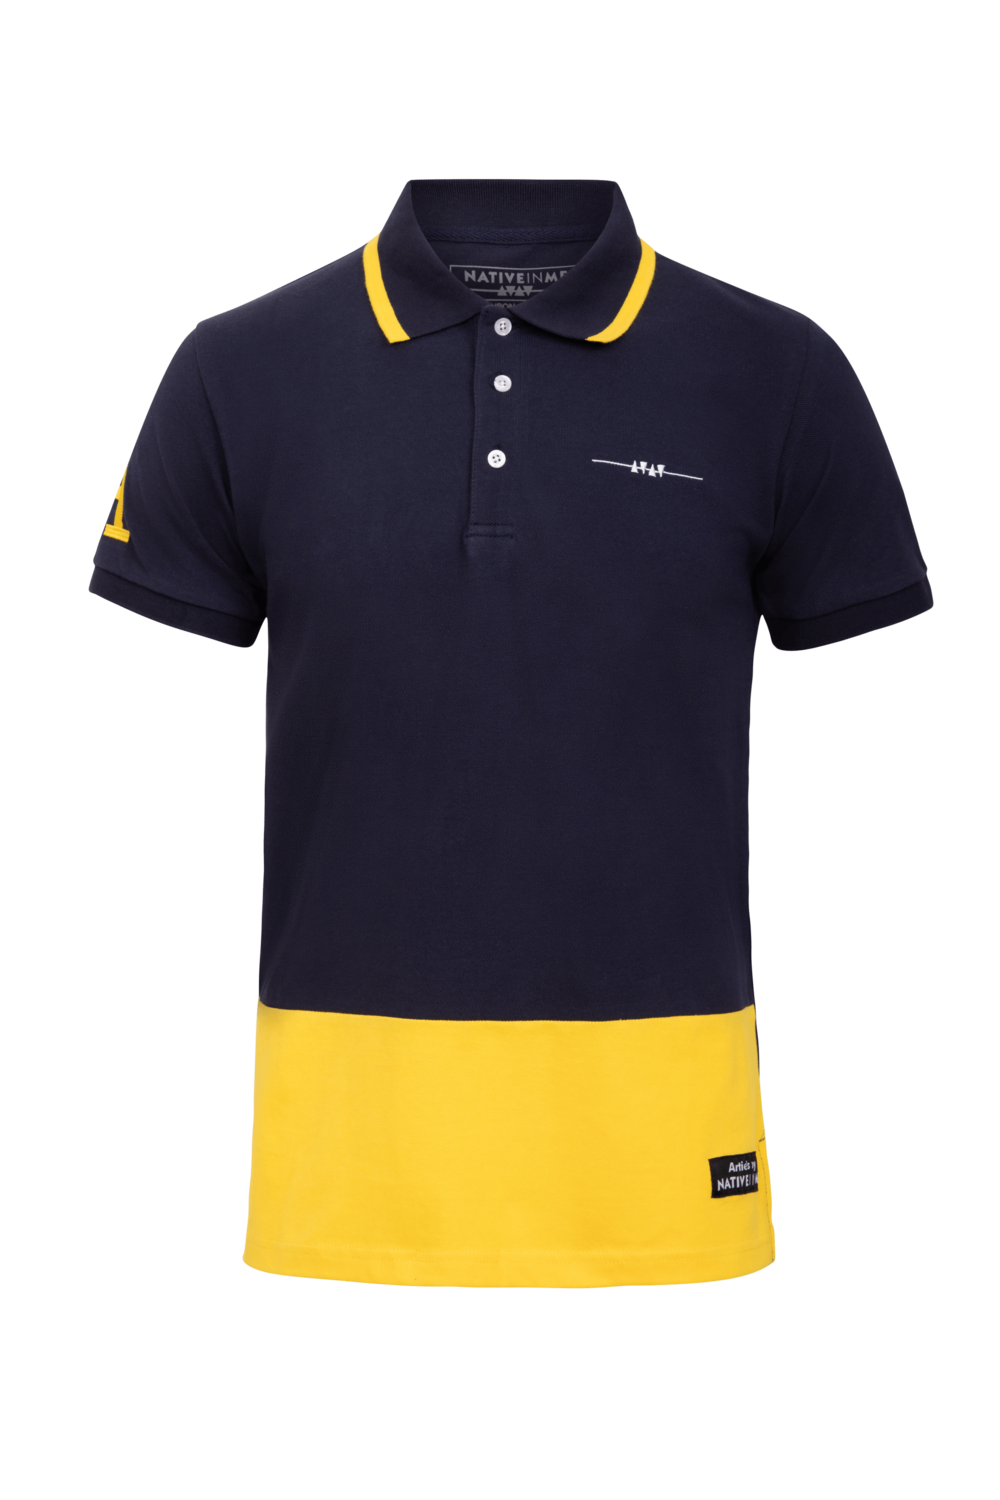 Arties by Native In Me Polo Shirt